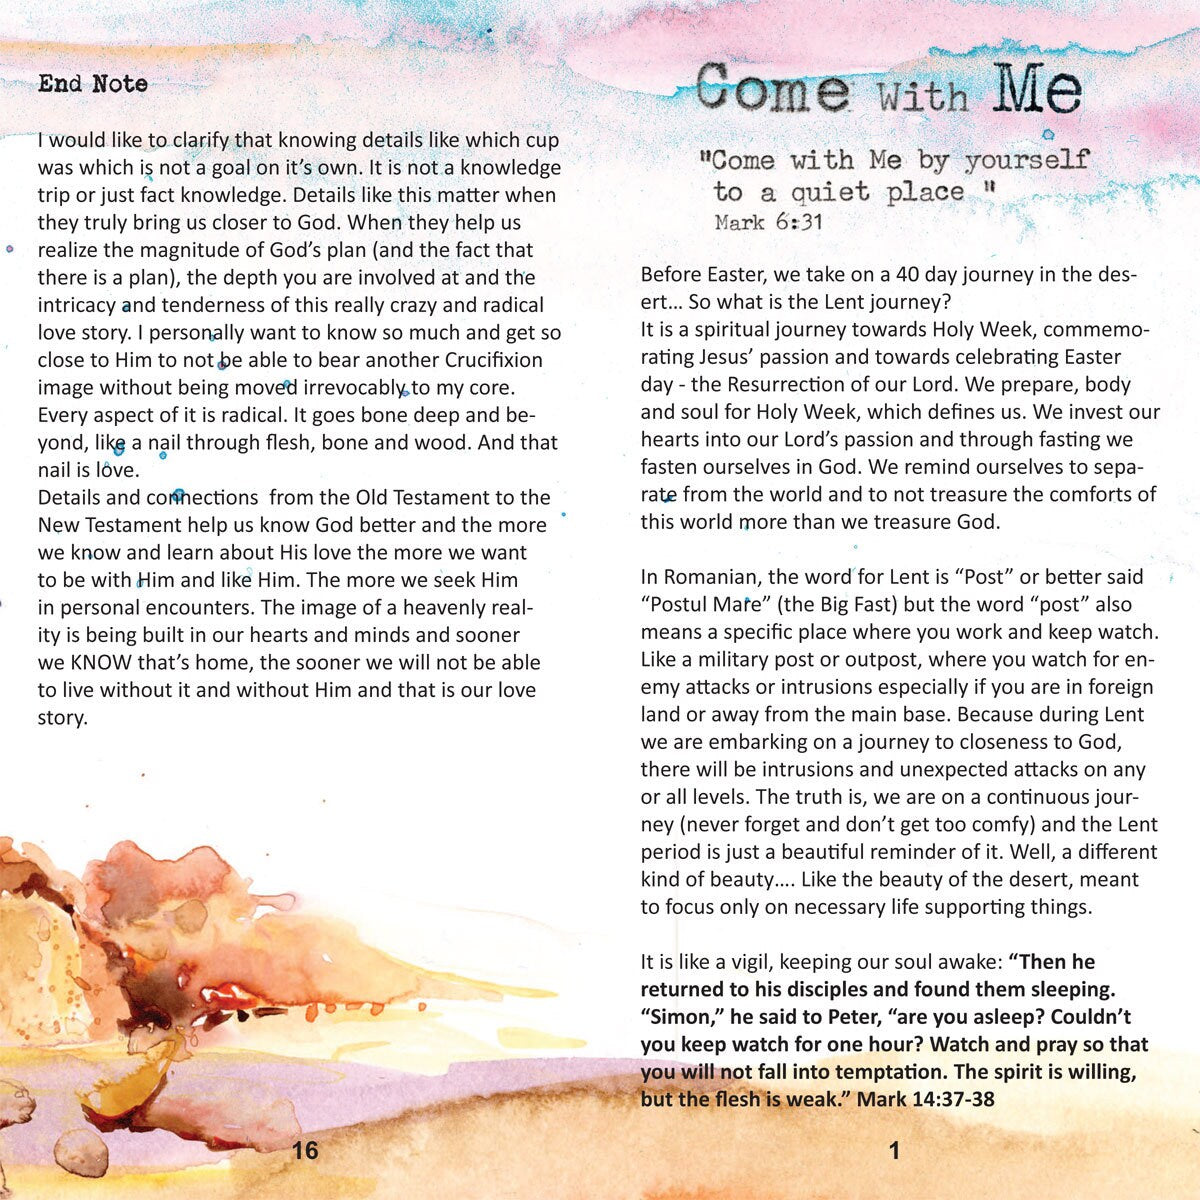 Come with Me - devotional booklet